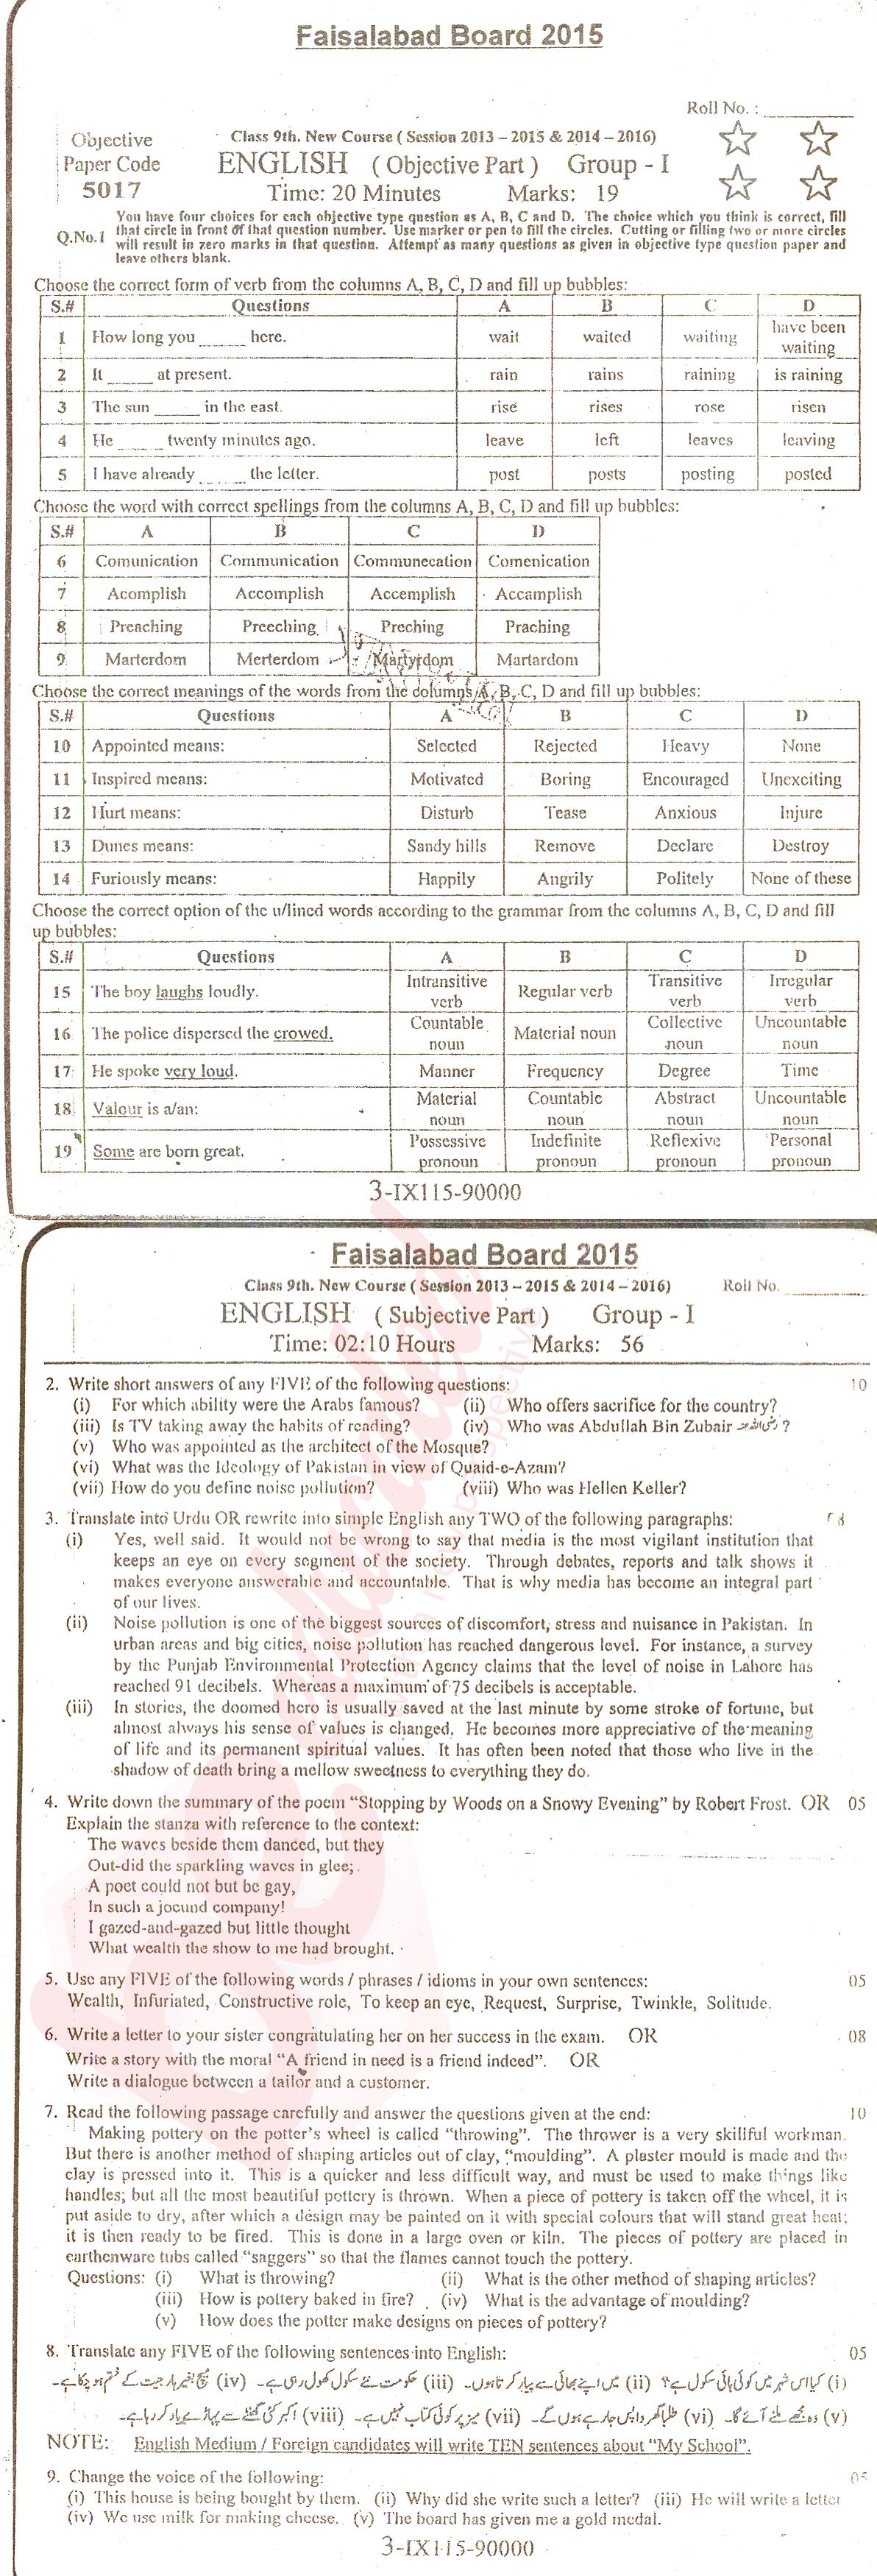 English 9th class Past Paper Group 1 BISE Faisalabad 2015